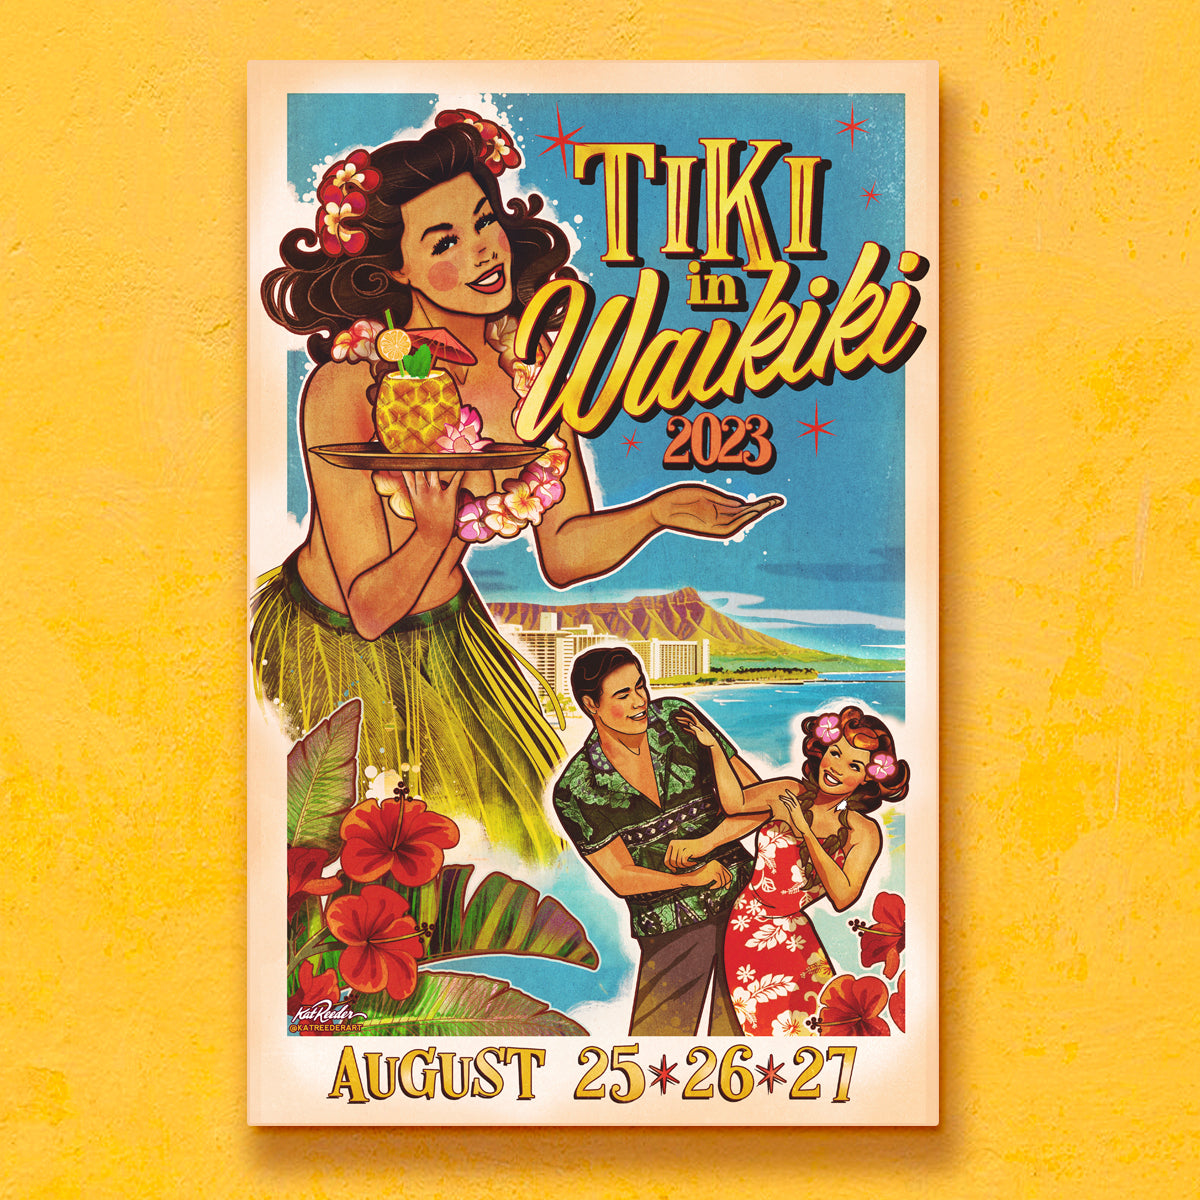 retro style poster for 2023 Tiki in Waikiki Festival featuring a retro pin up girl serving drinks, waikiki and diamond head, and a couple dancing in the distance